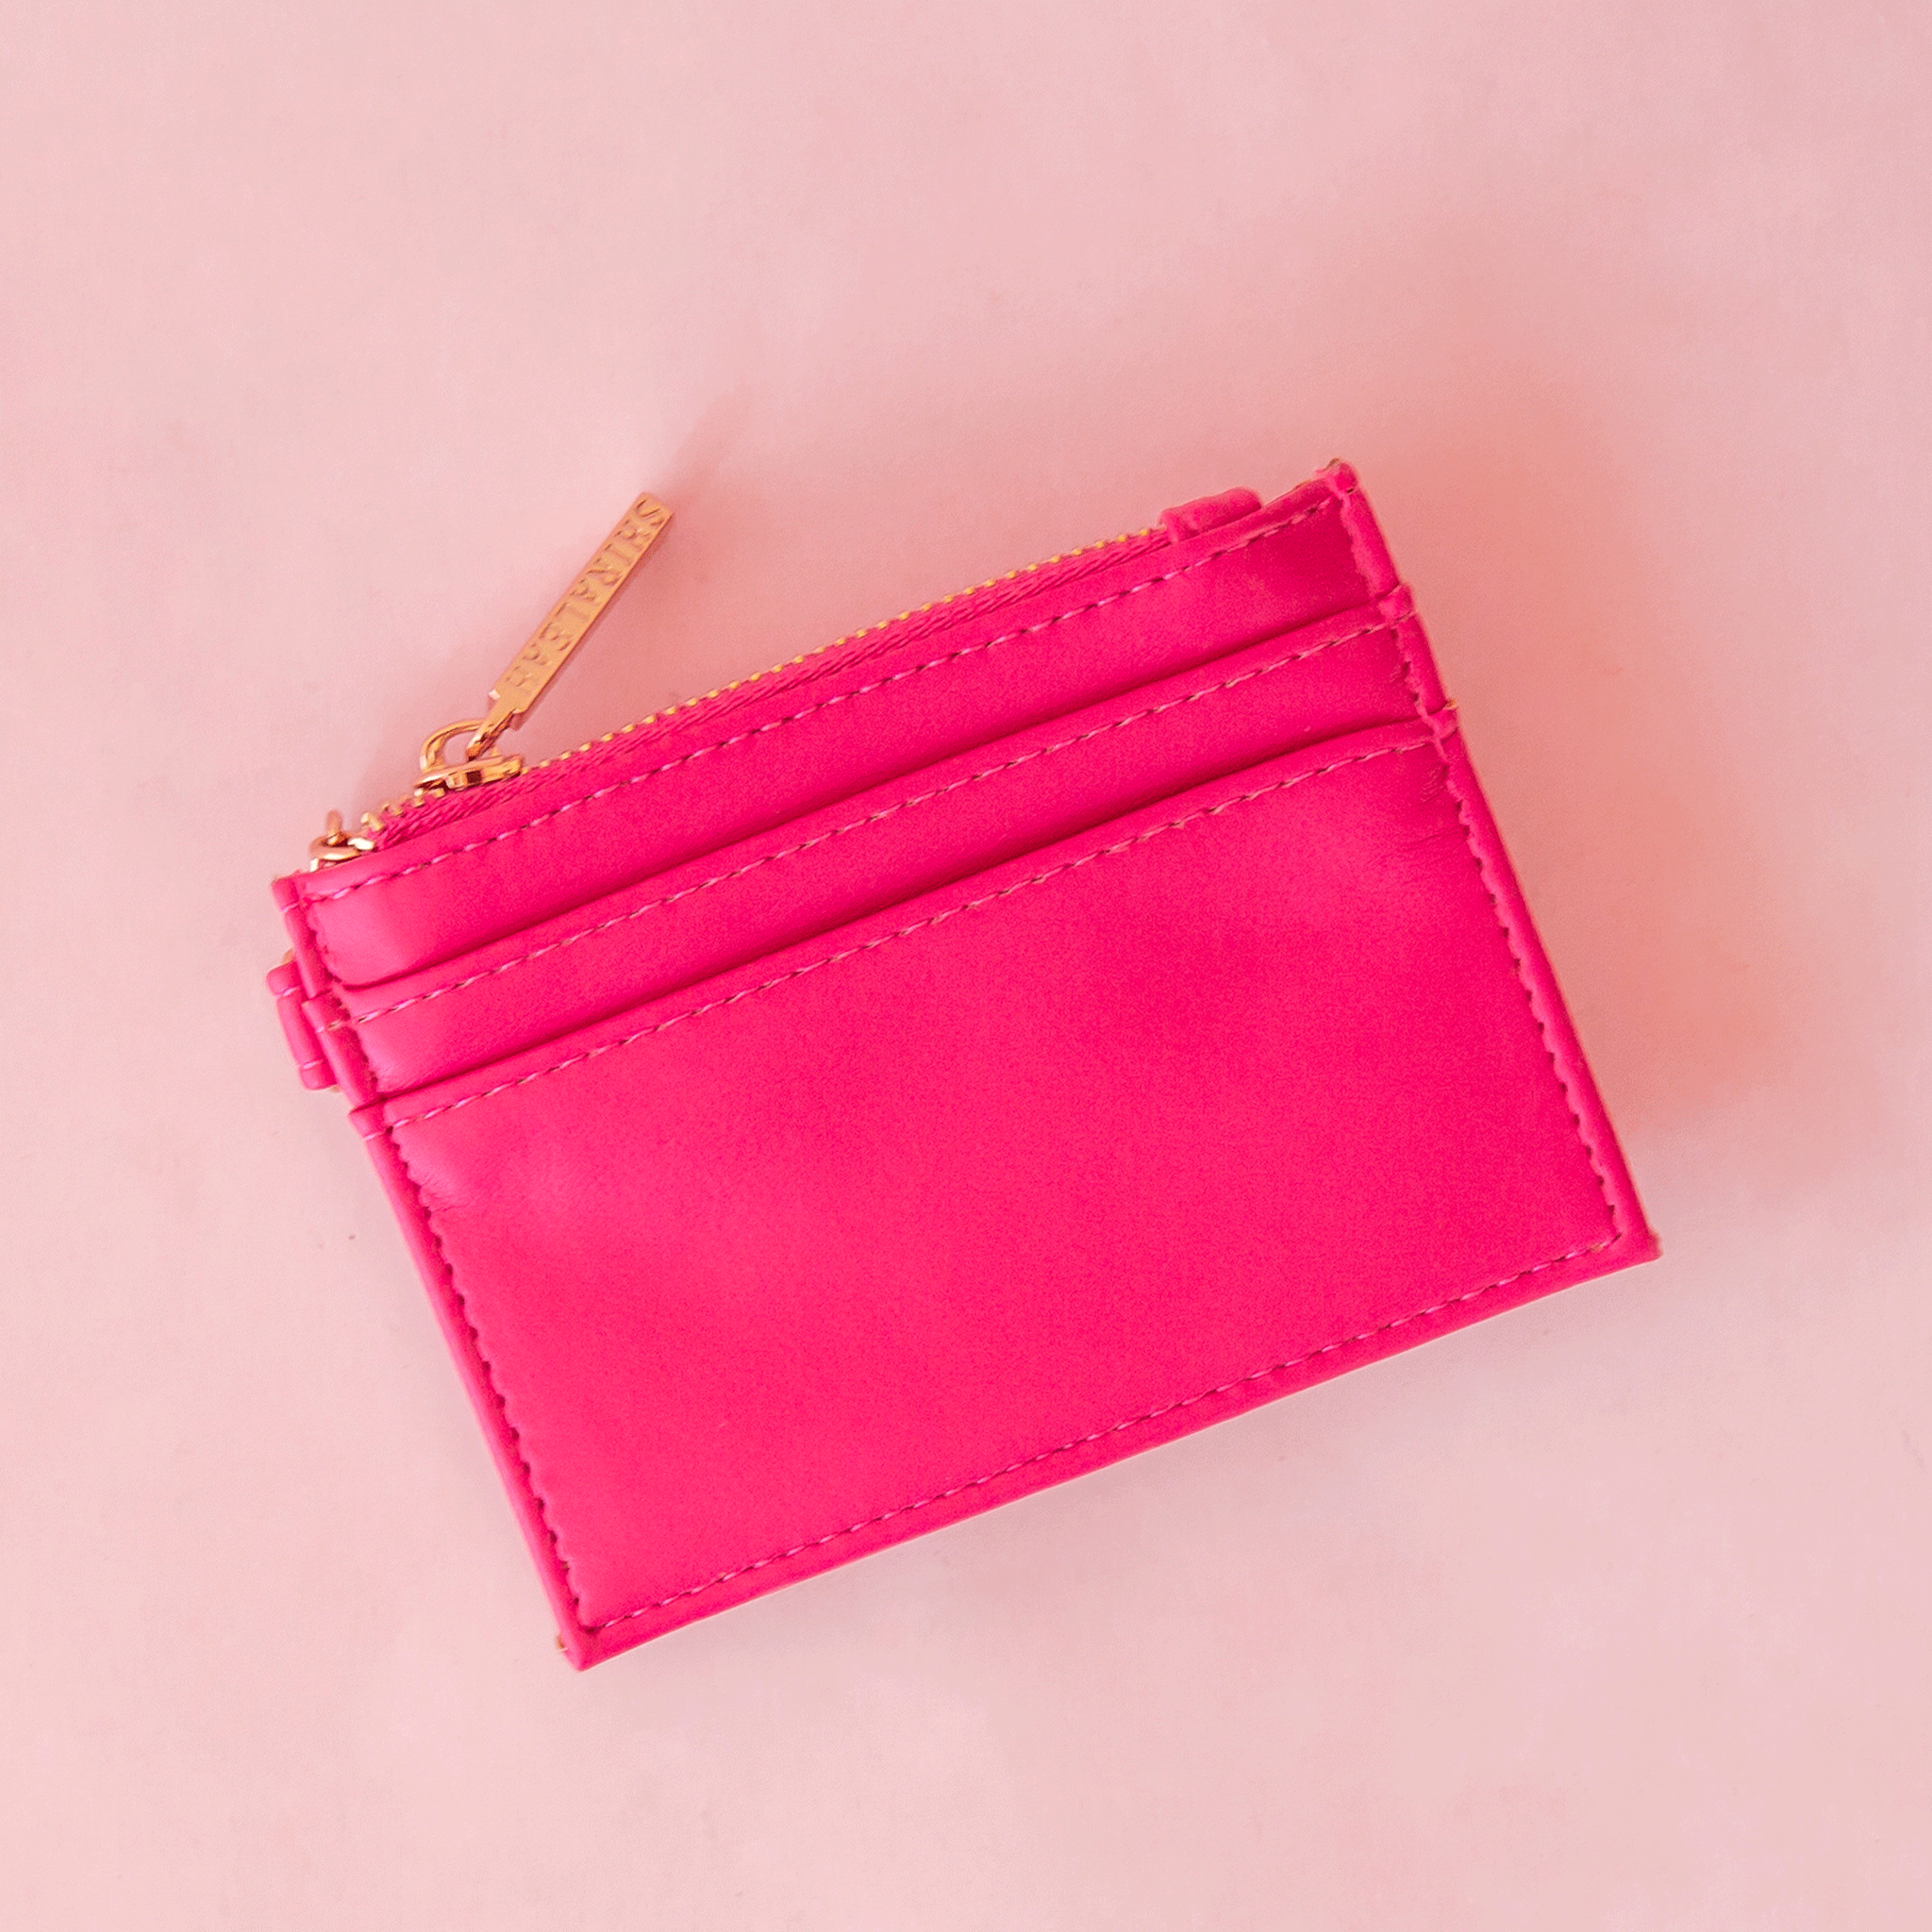 On a pink background is a hot pink card case with a gold zipper and details.